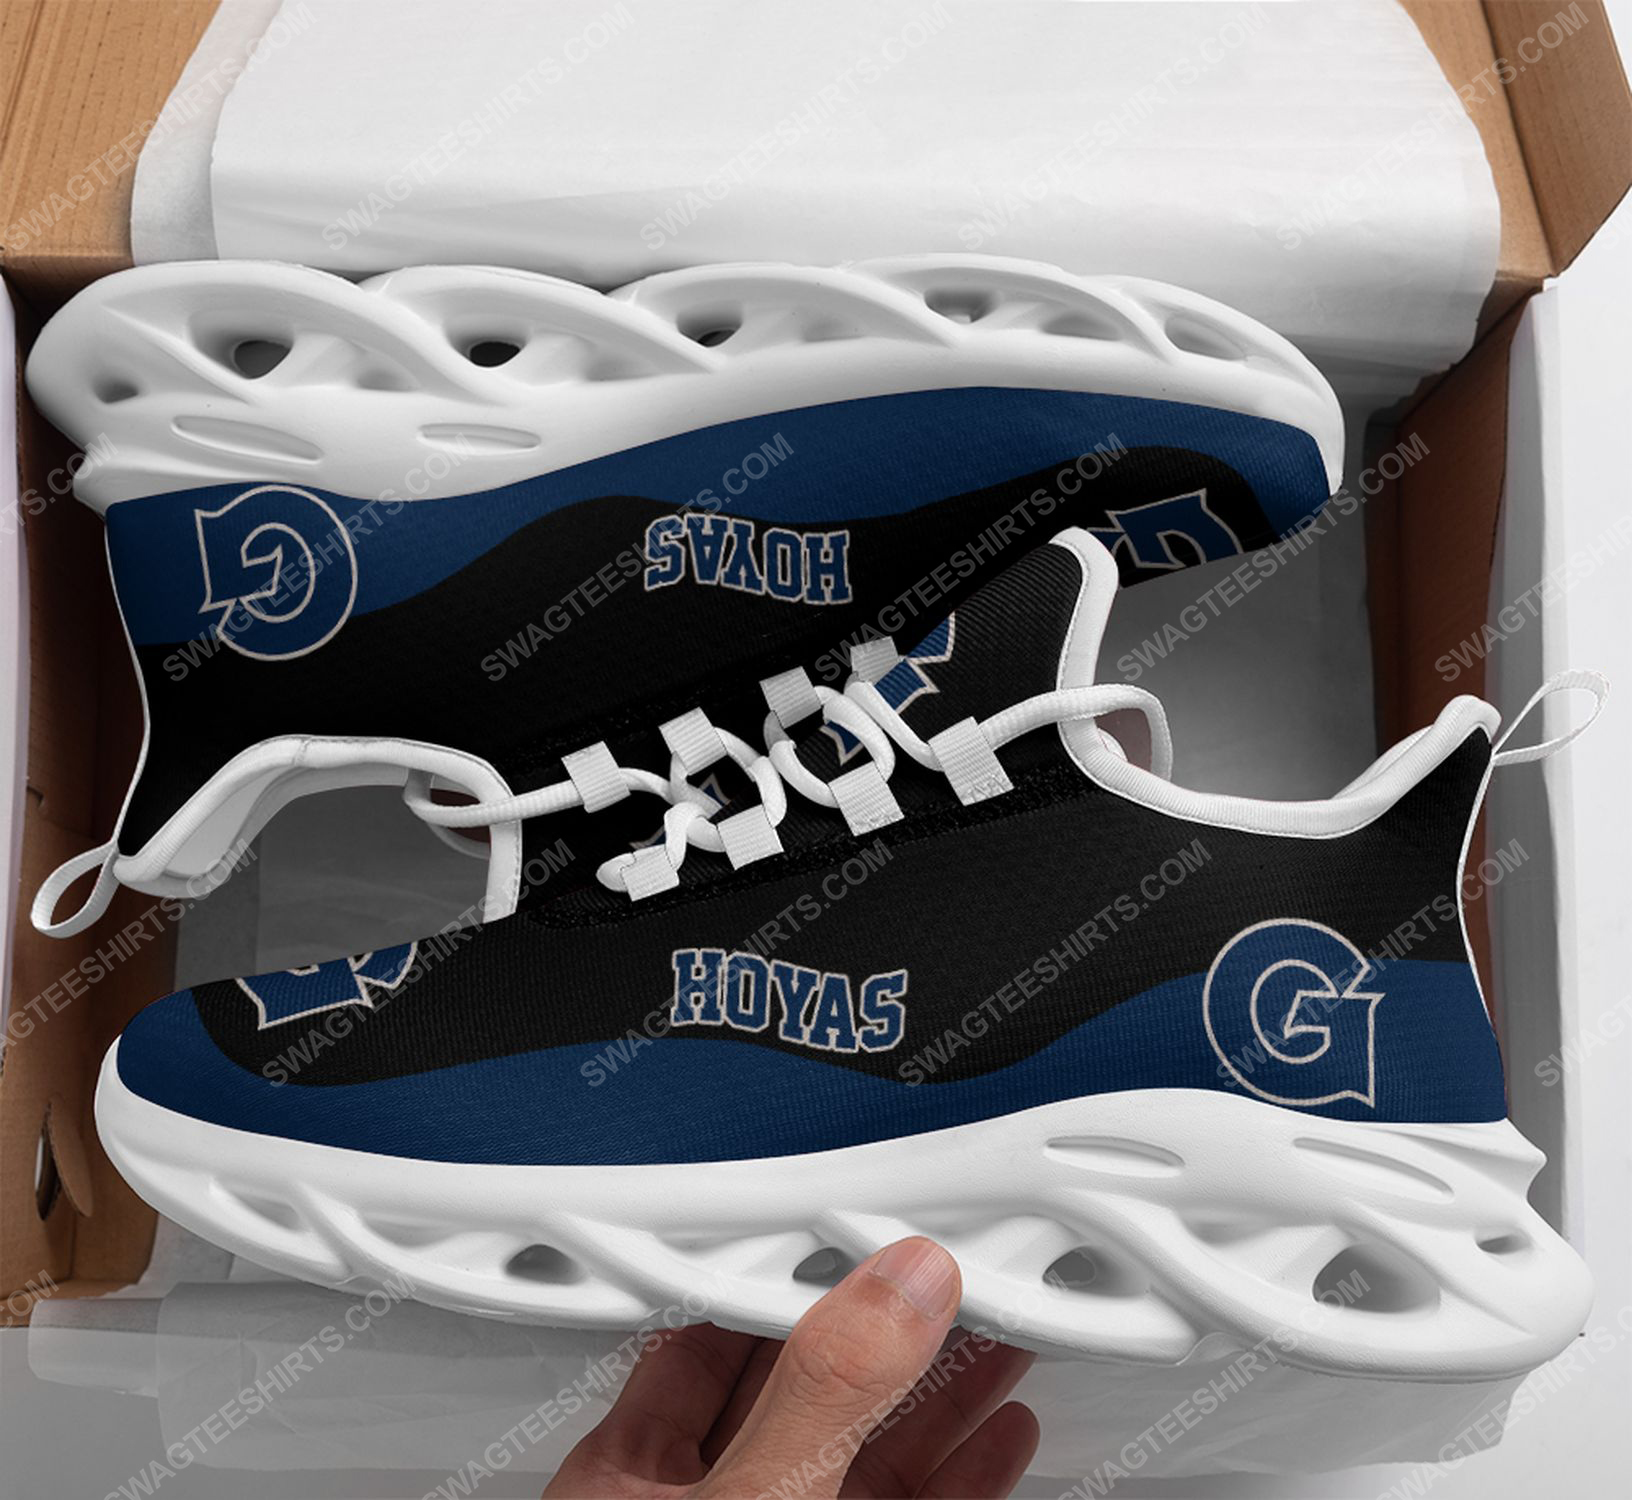 The georgetown hoyas football team max soul shoes 1